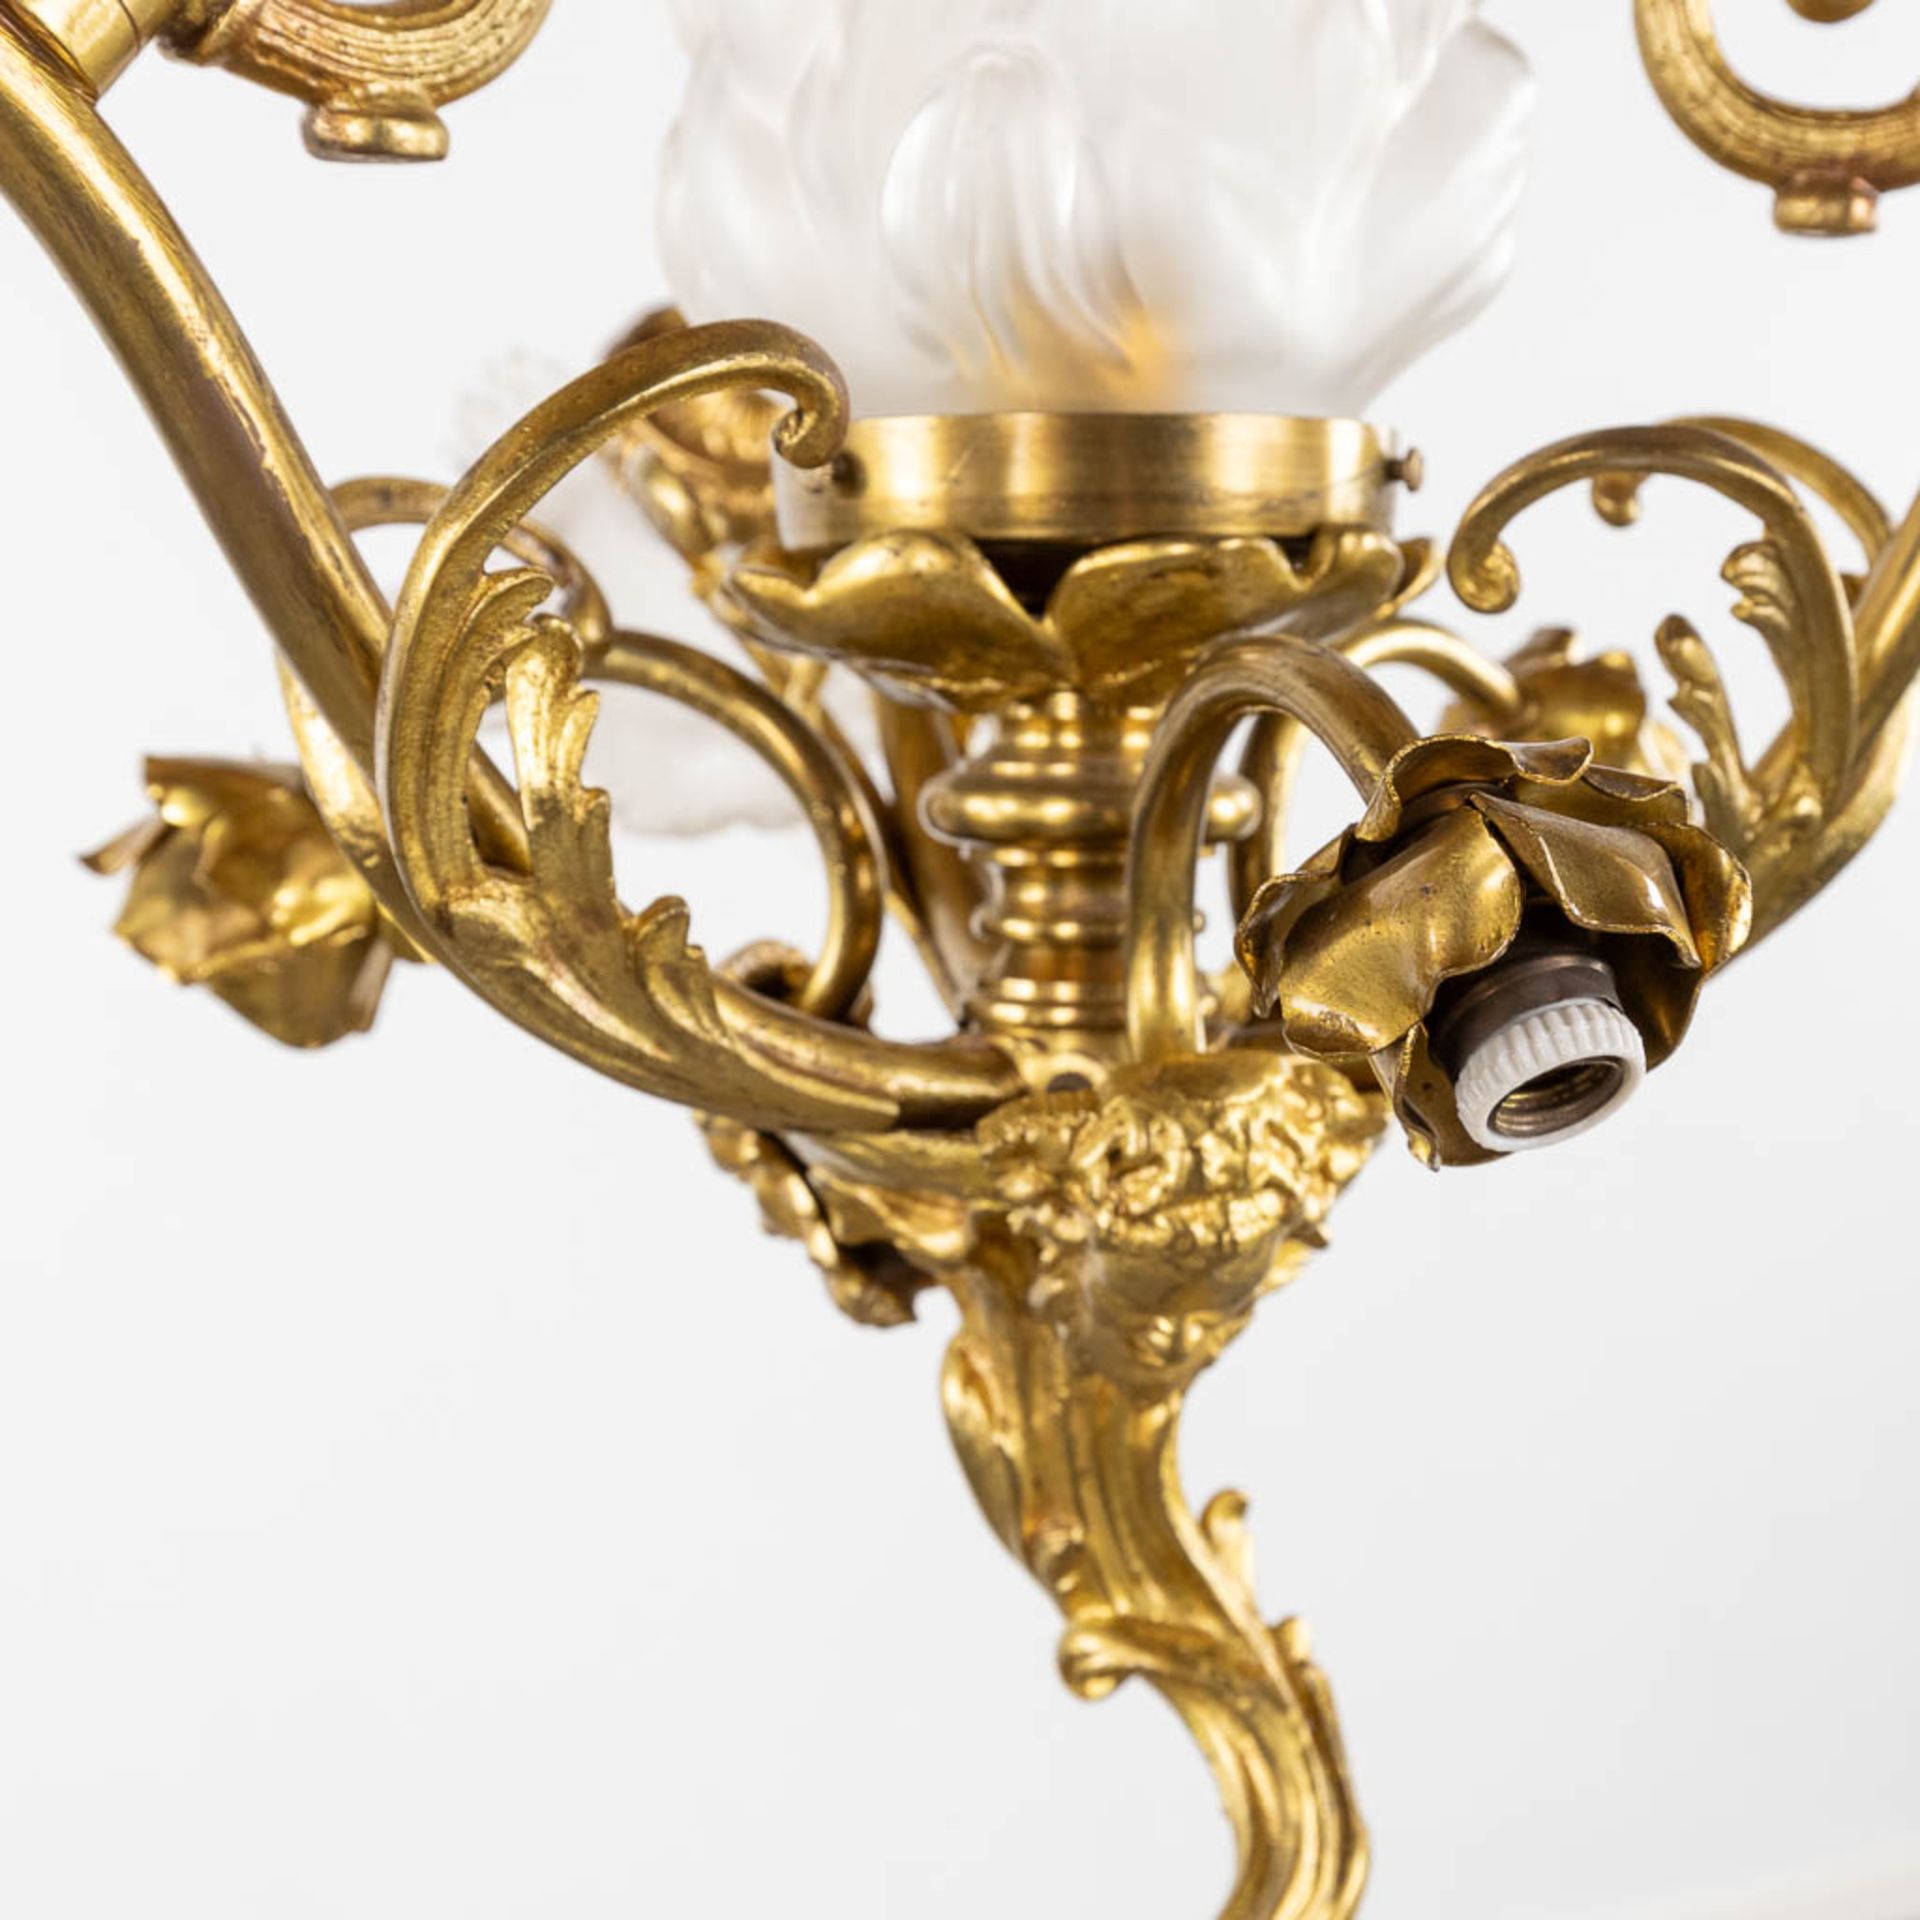 A chandelier, bronze with glass shades and a flambeau, decorated with Satyr figurines. (H:88 x D:54 - Image 8 of 13